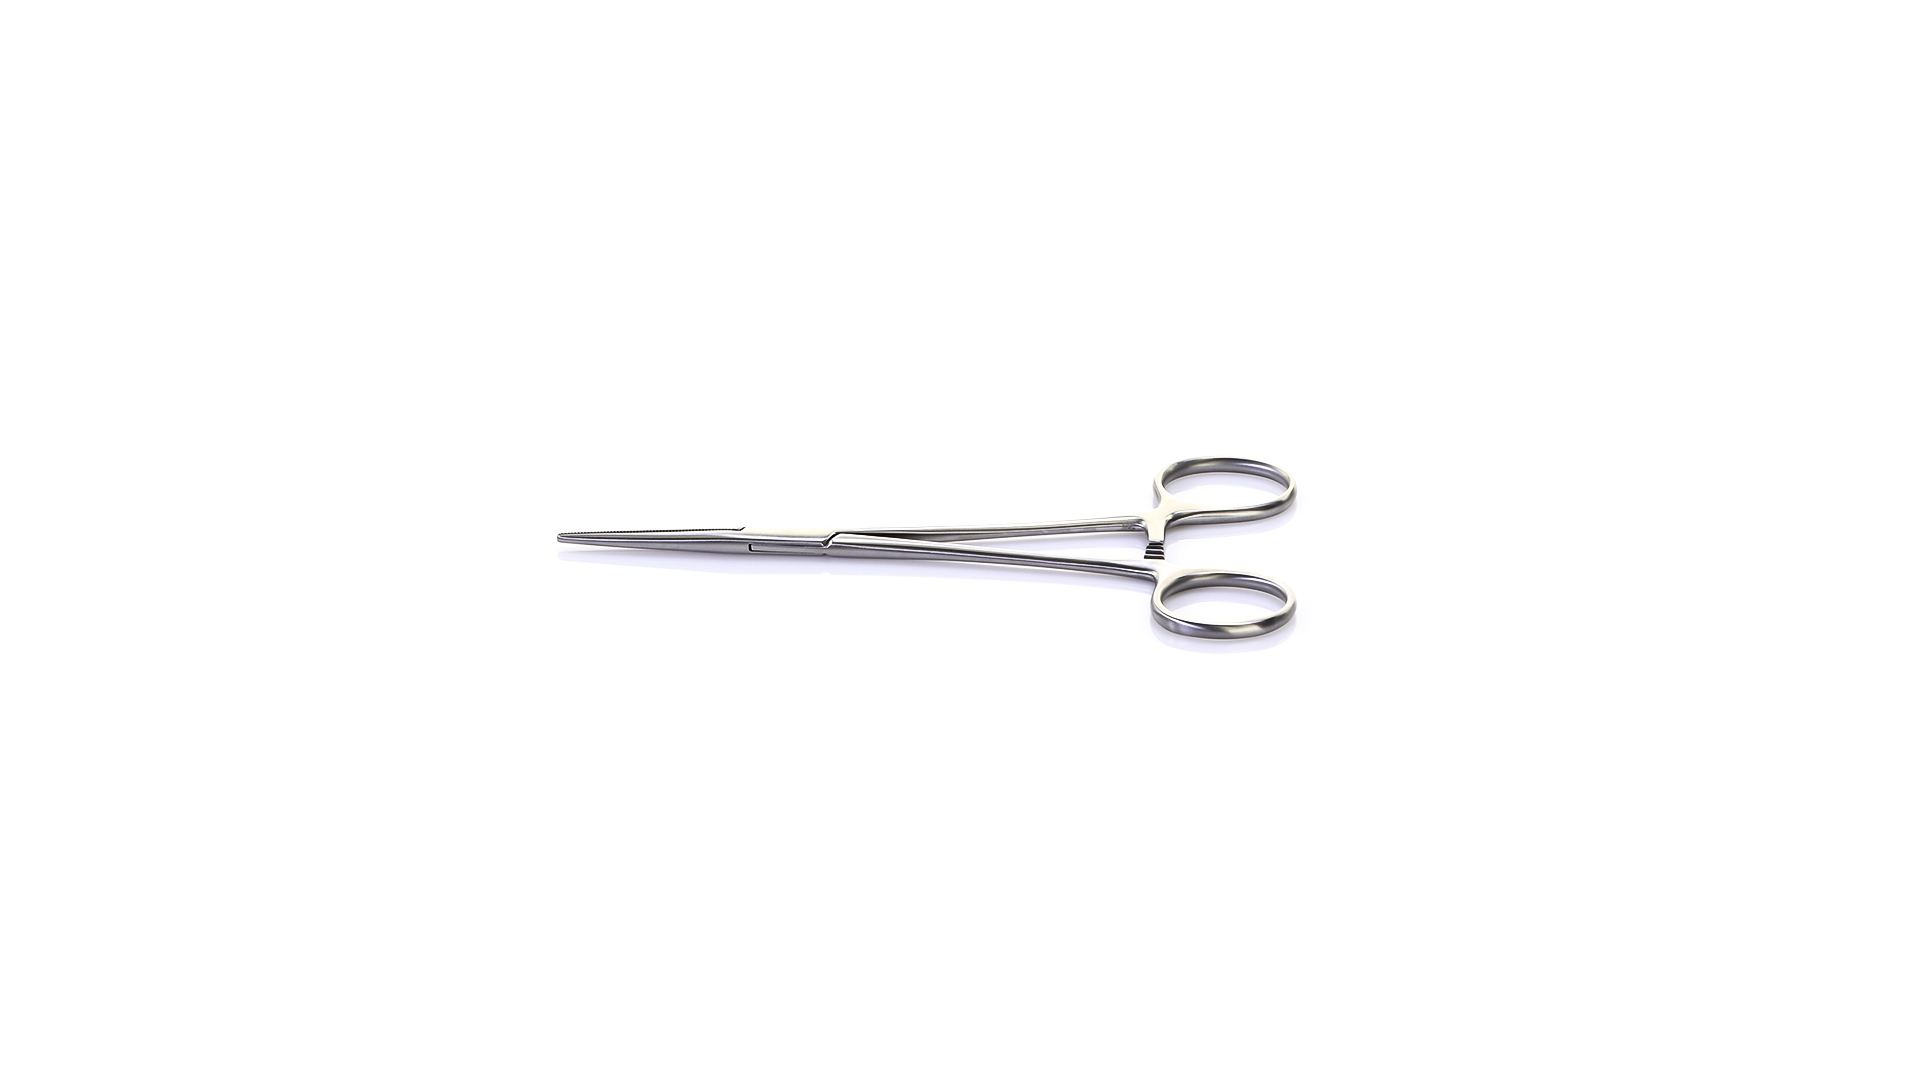 Crile Forceps - Straight serrated jaws